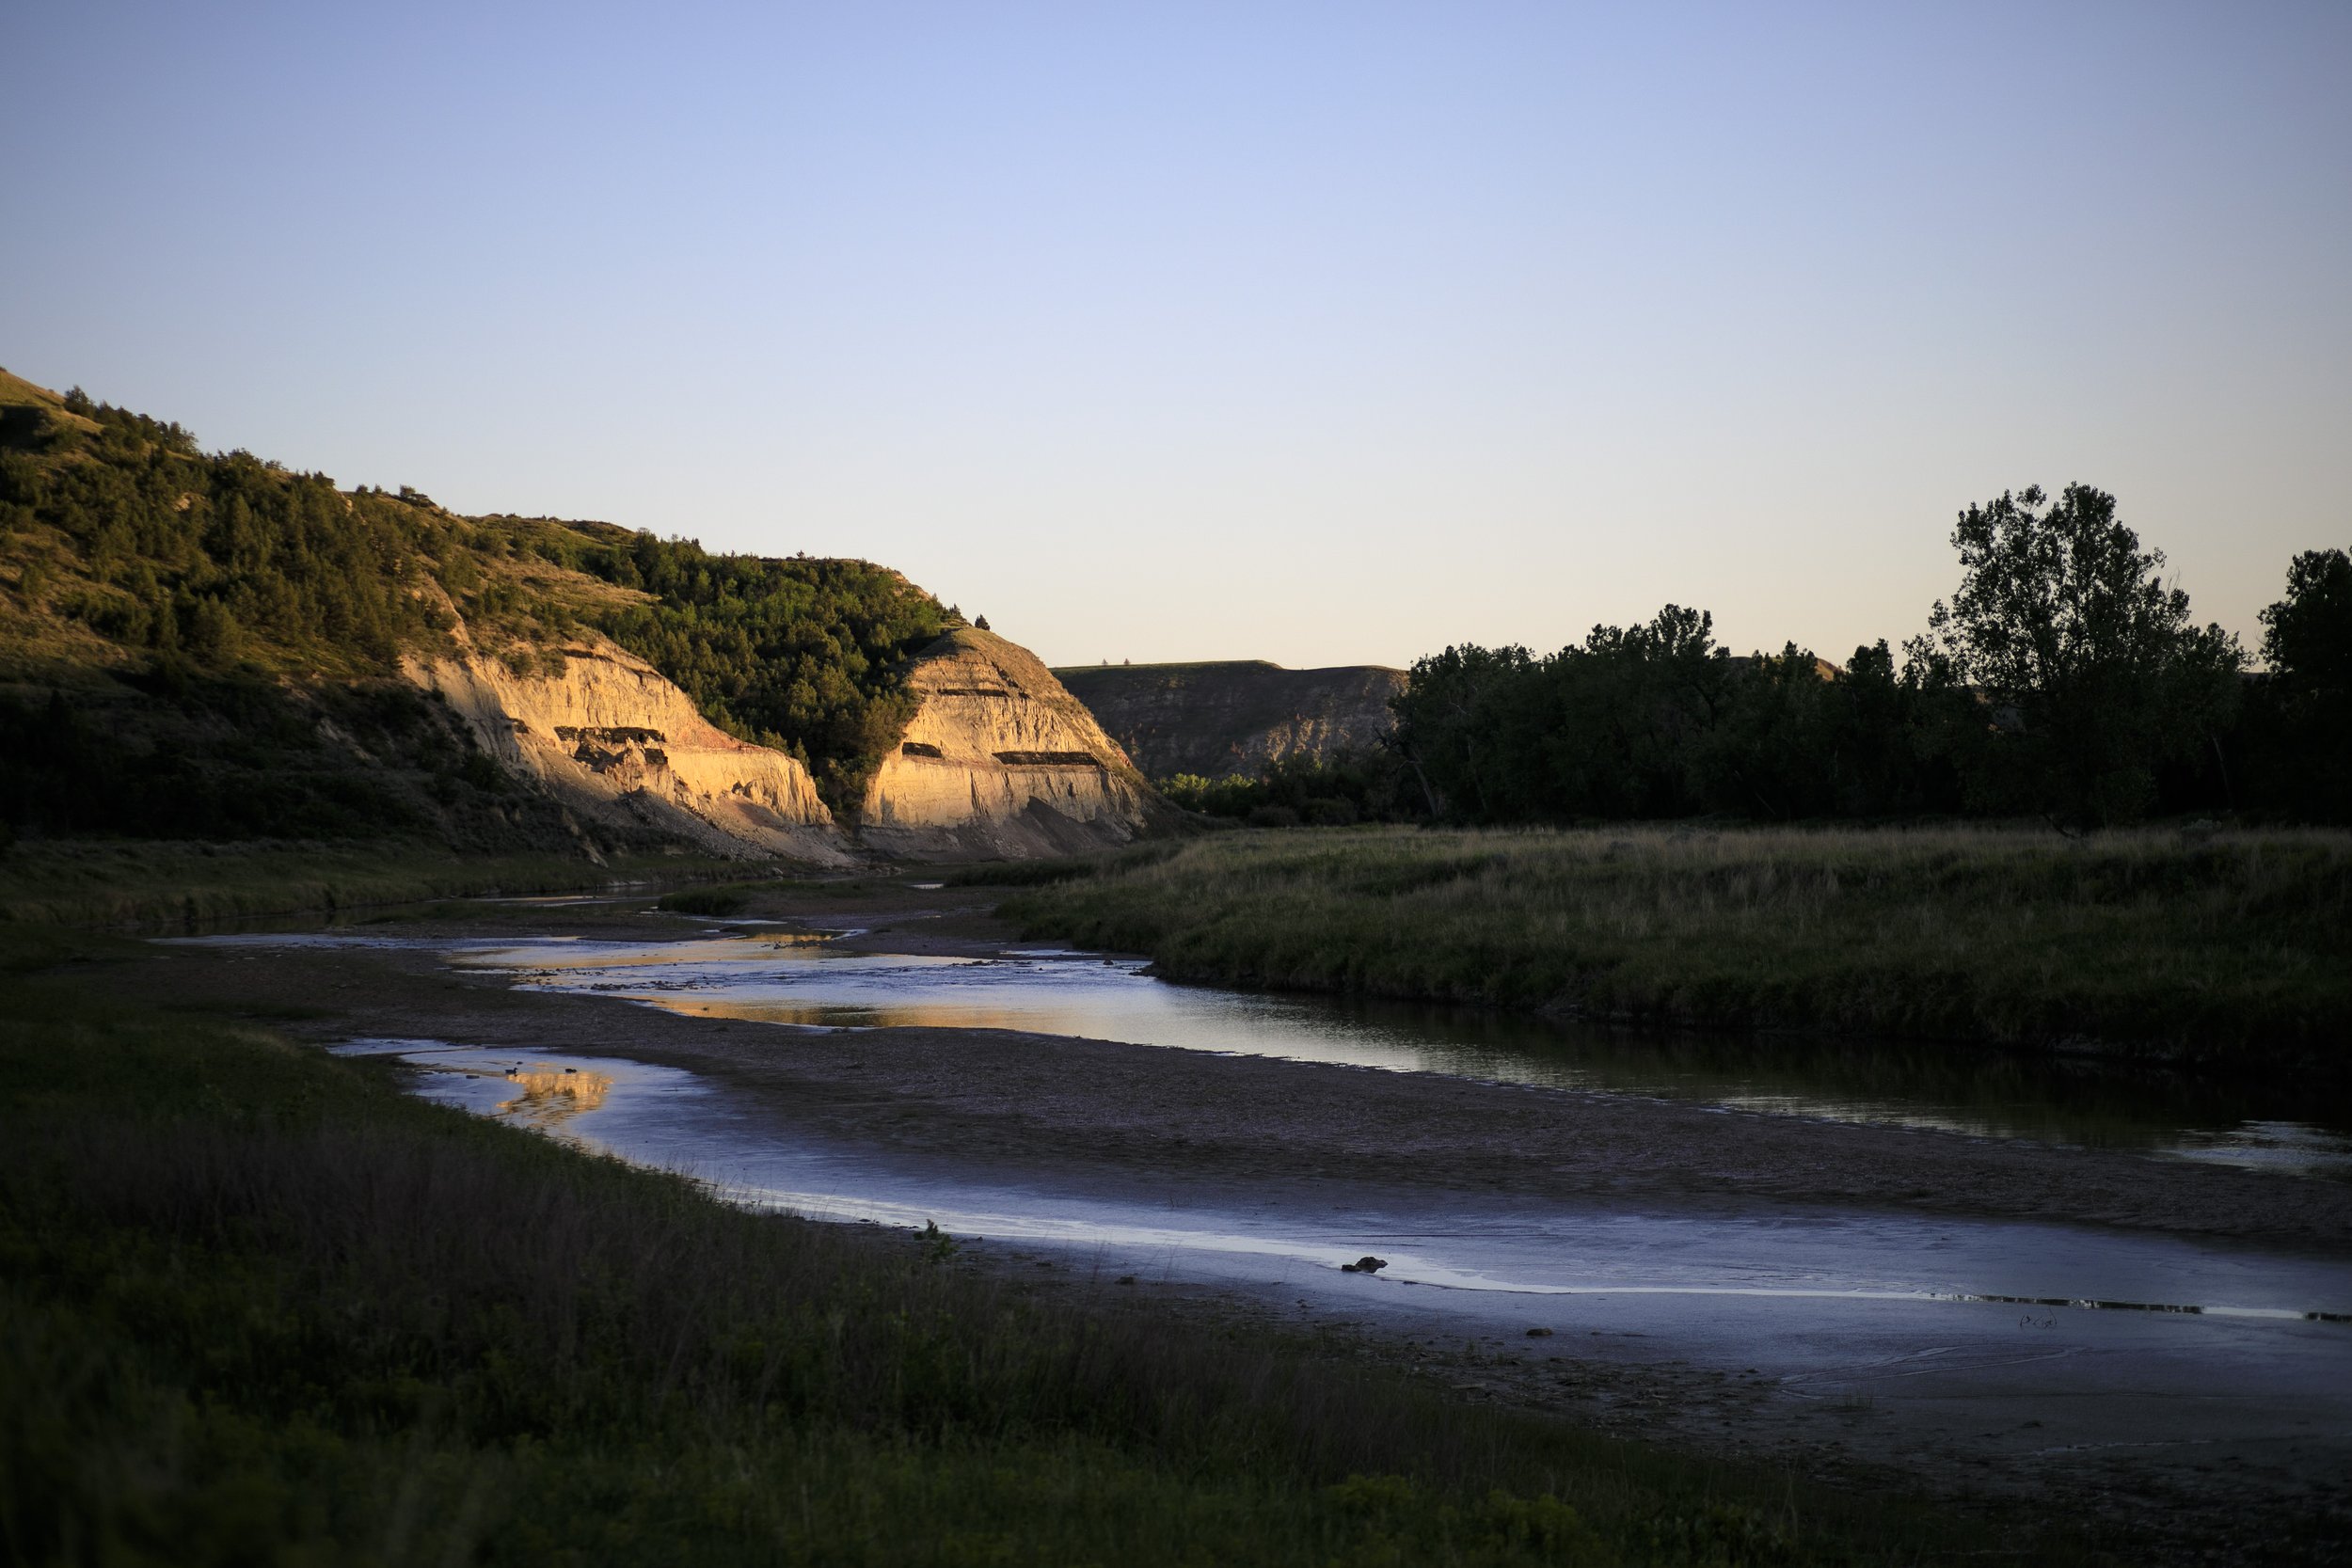  The sunset shines on a cliff along the Little Missouri River on June 12, 2021 in Theodore Roosevelt National Park, North Dakota. 